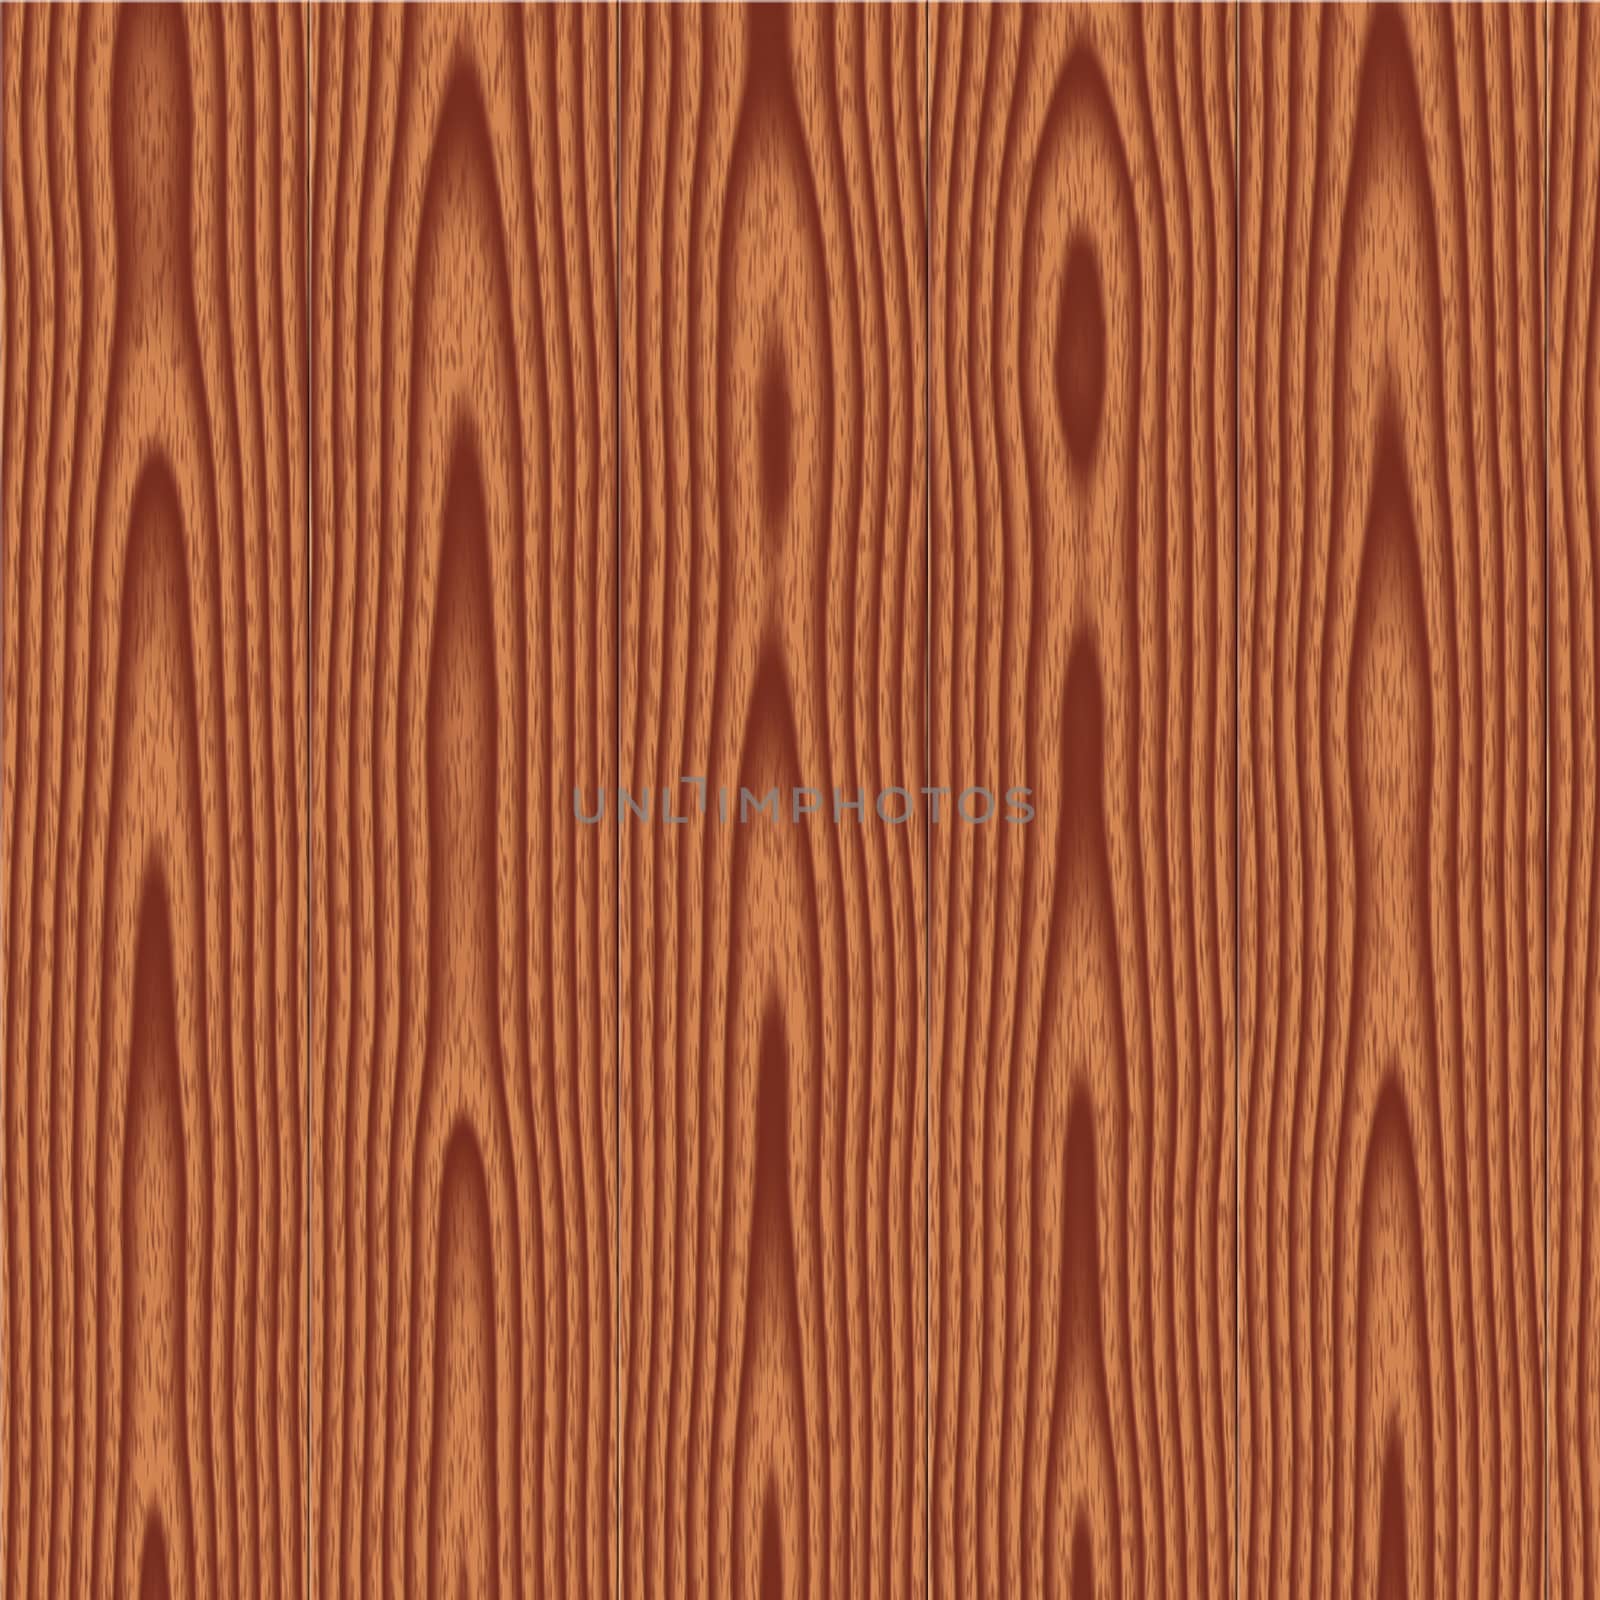 wood texture. The detailed fragment of a wooden board